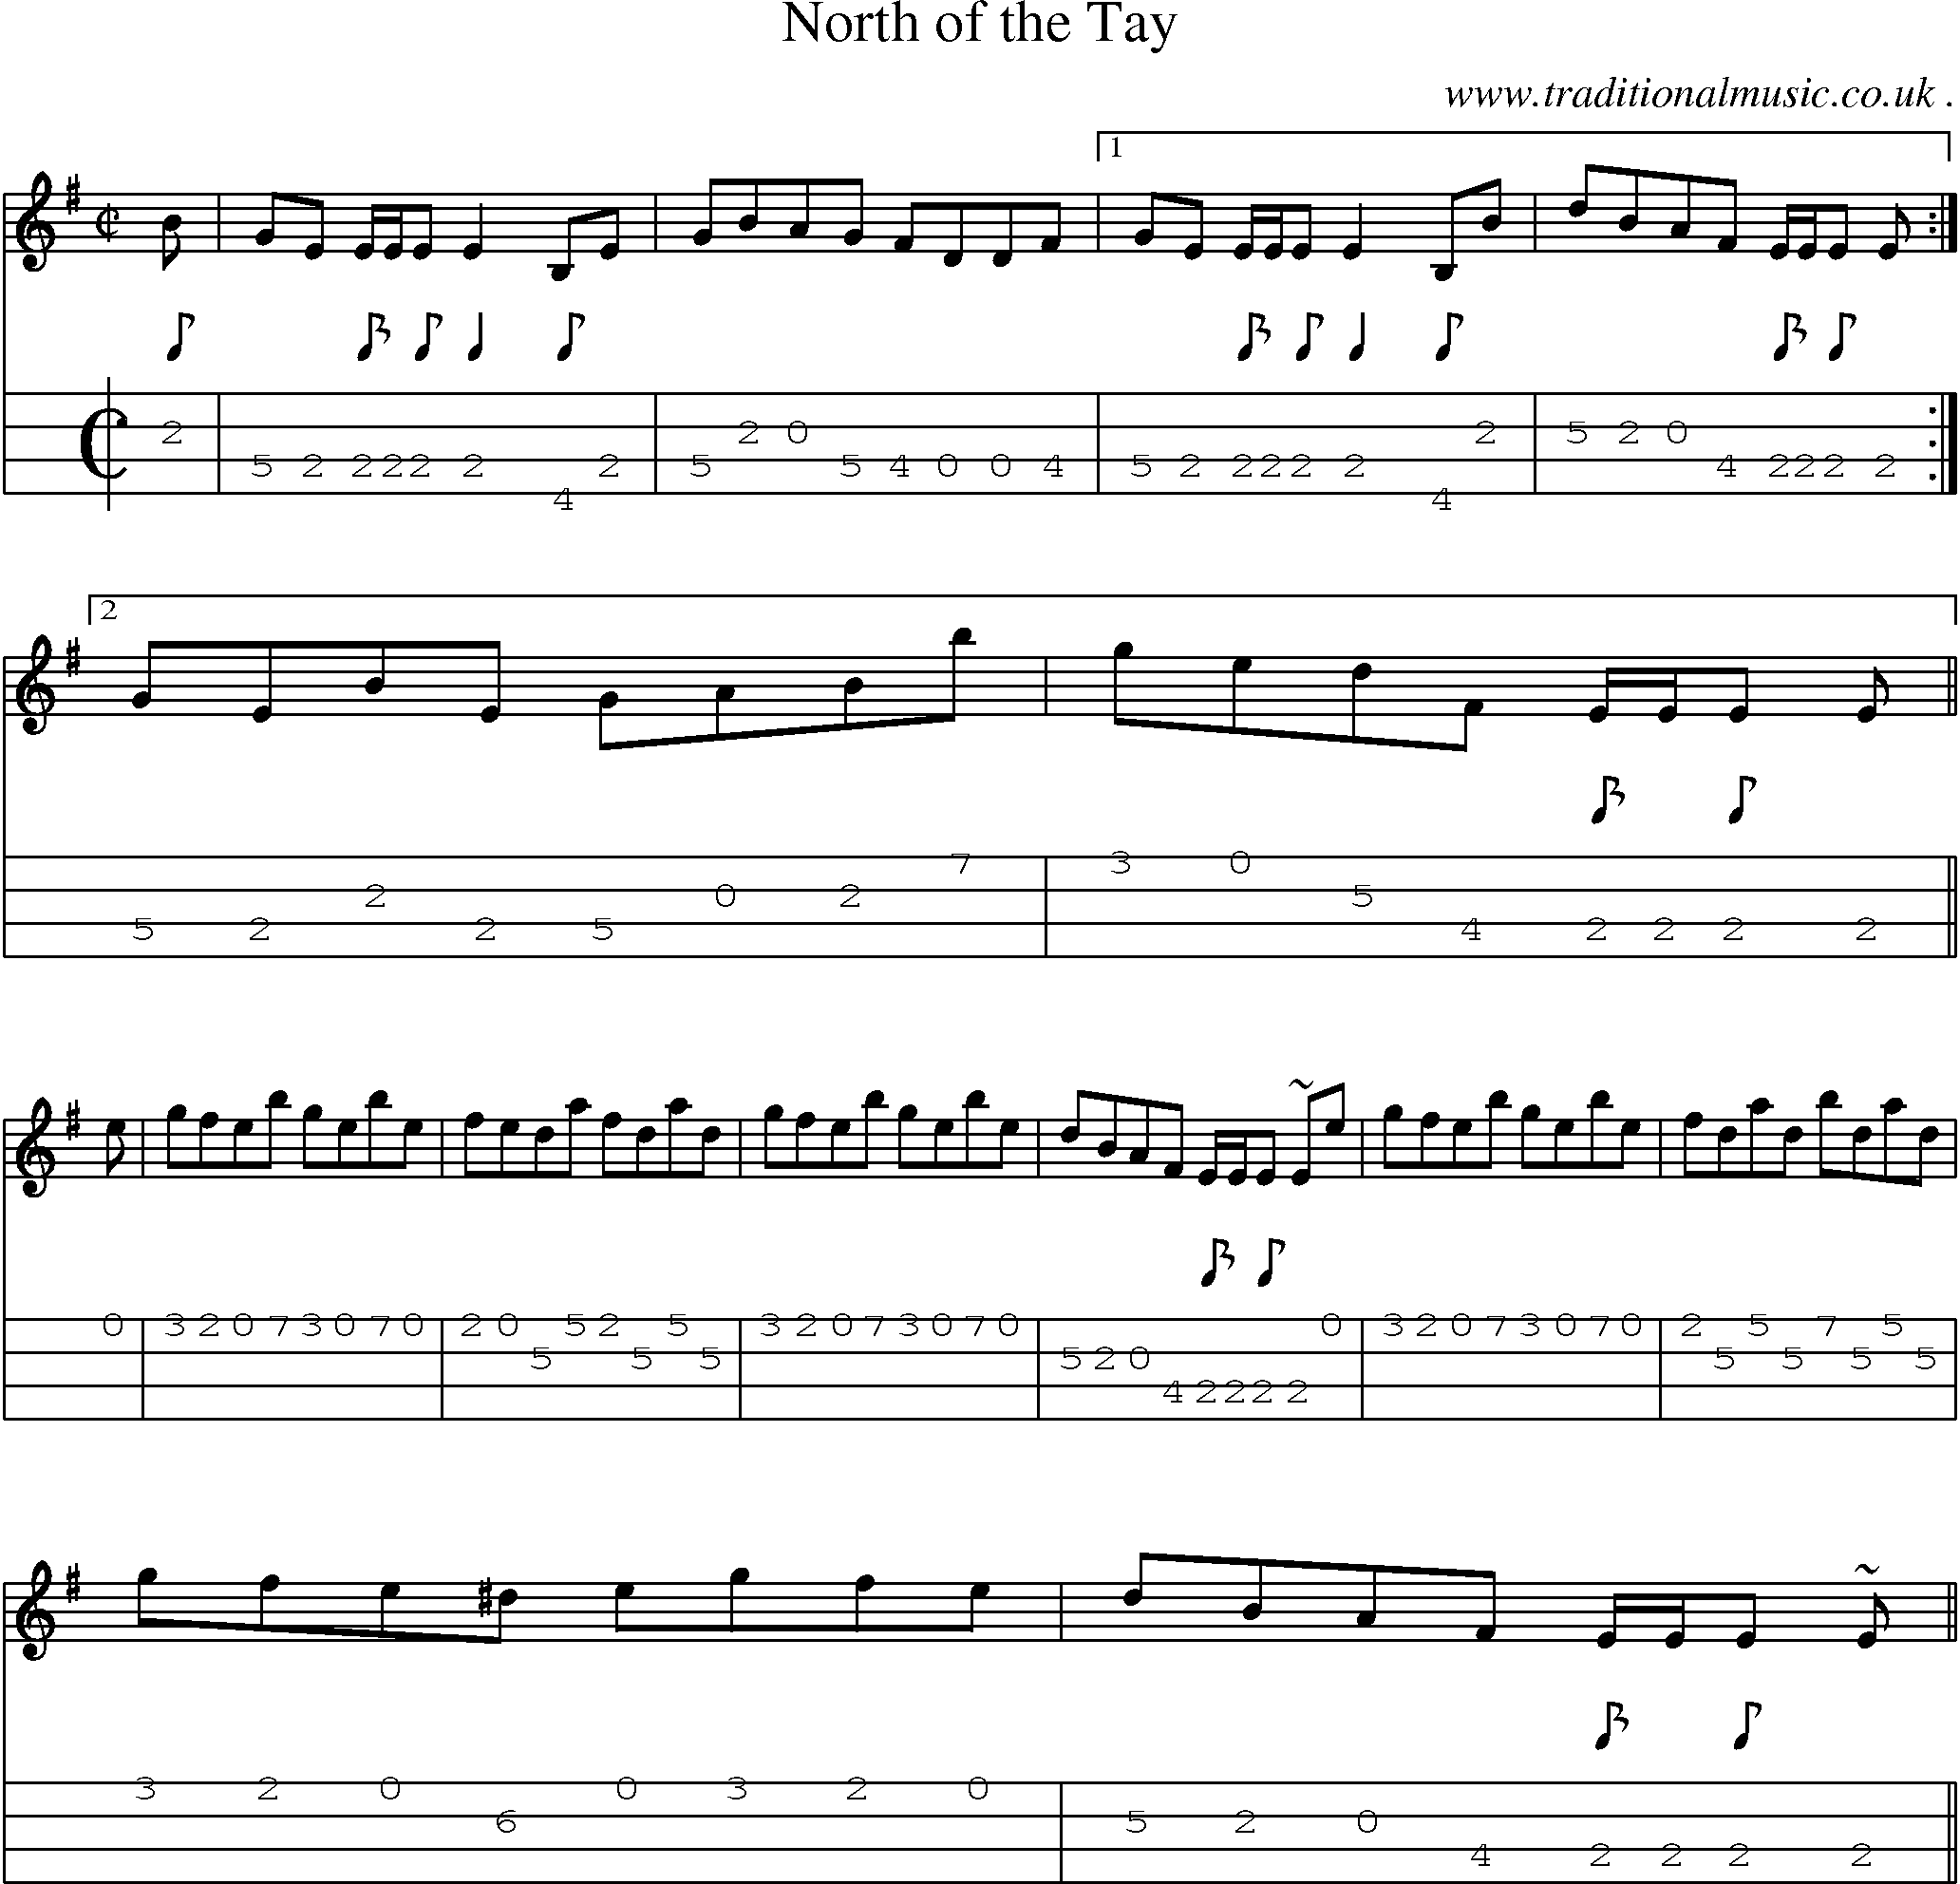 Sheet-music  score, Chords and Mandolin Tabs for North Of The Tay